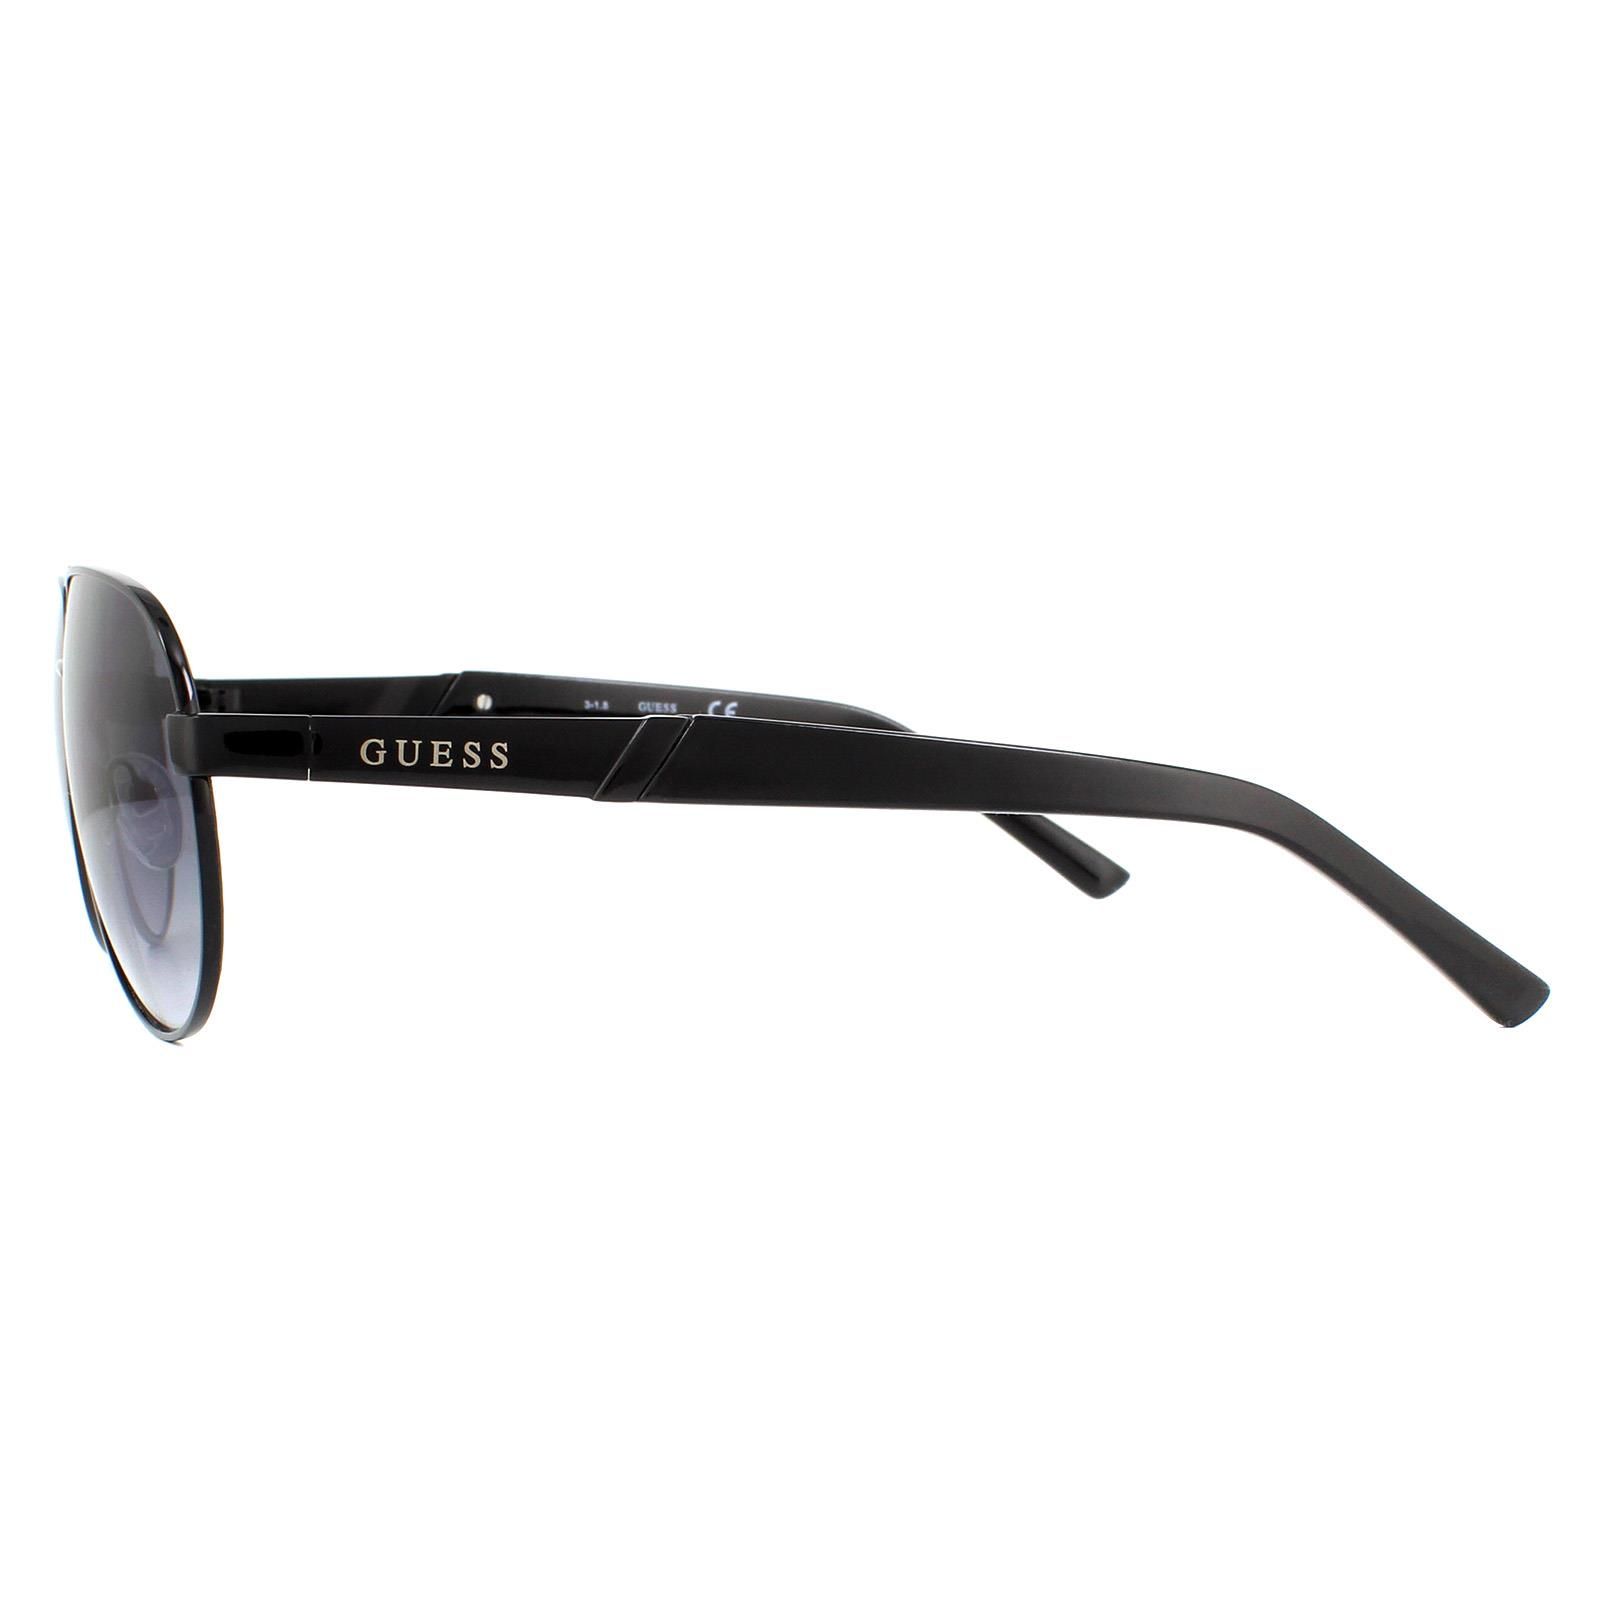 Guess Sunglasses GF5031 01B Black Grey Gradient are a stylish pilot style with a sold metal frame which then merges diagonally, halfway down the arms after the Guess logo, into plastic temple tips.